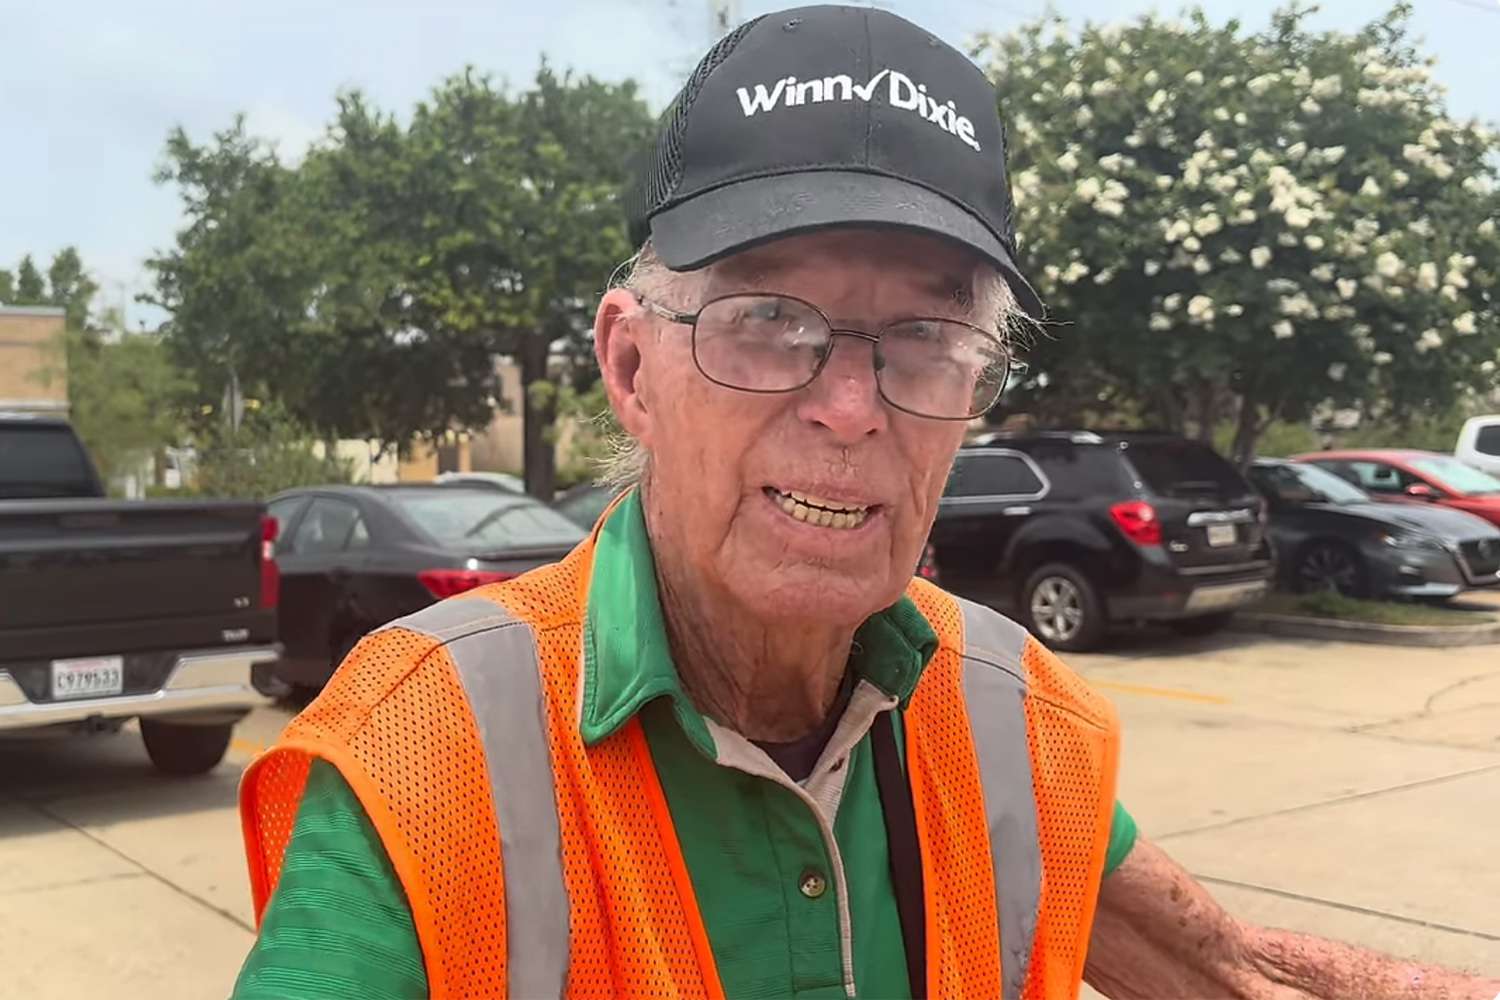 Veteran, 90, Was Working in the Heat on Memorial Day. Within a Day, Over $200K Was Raised So He Could Retire